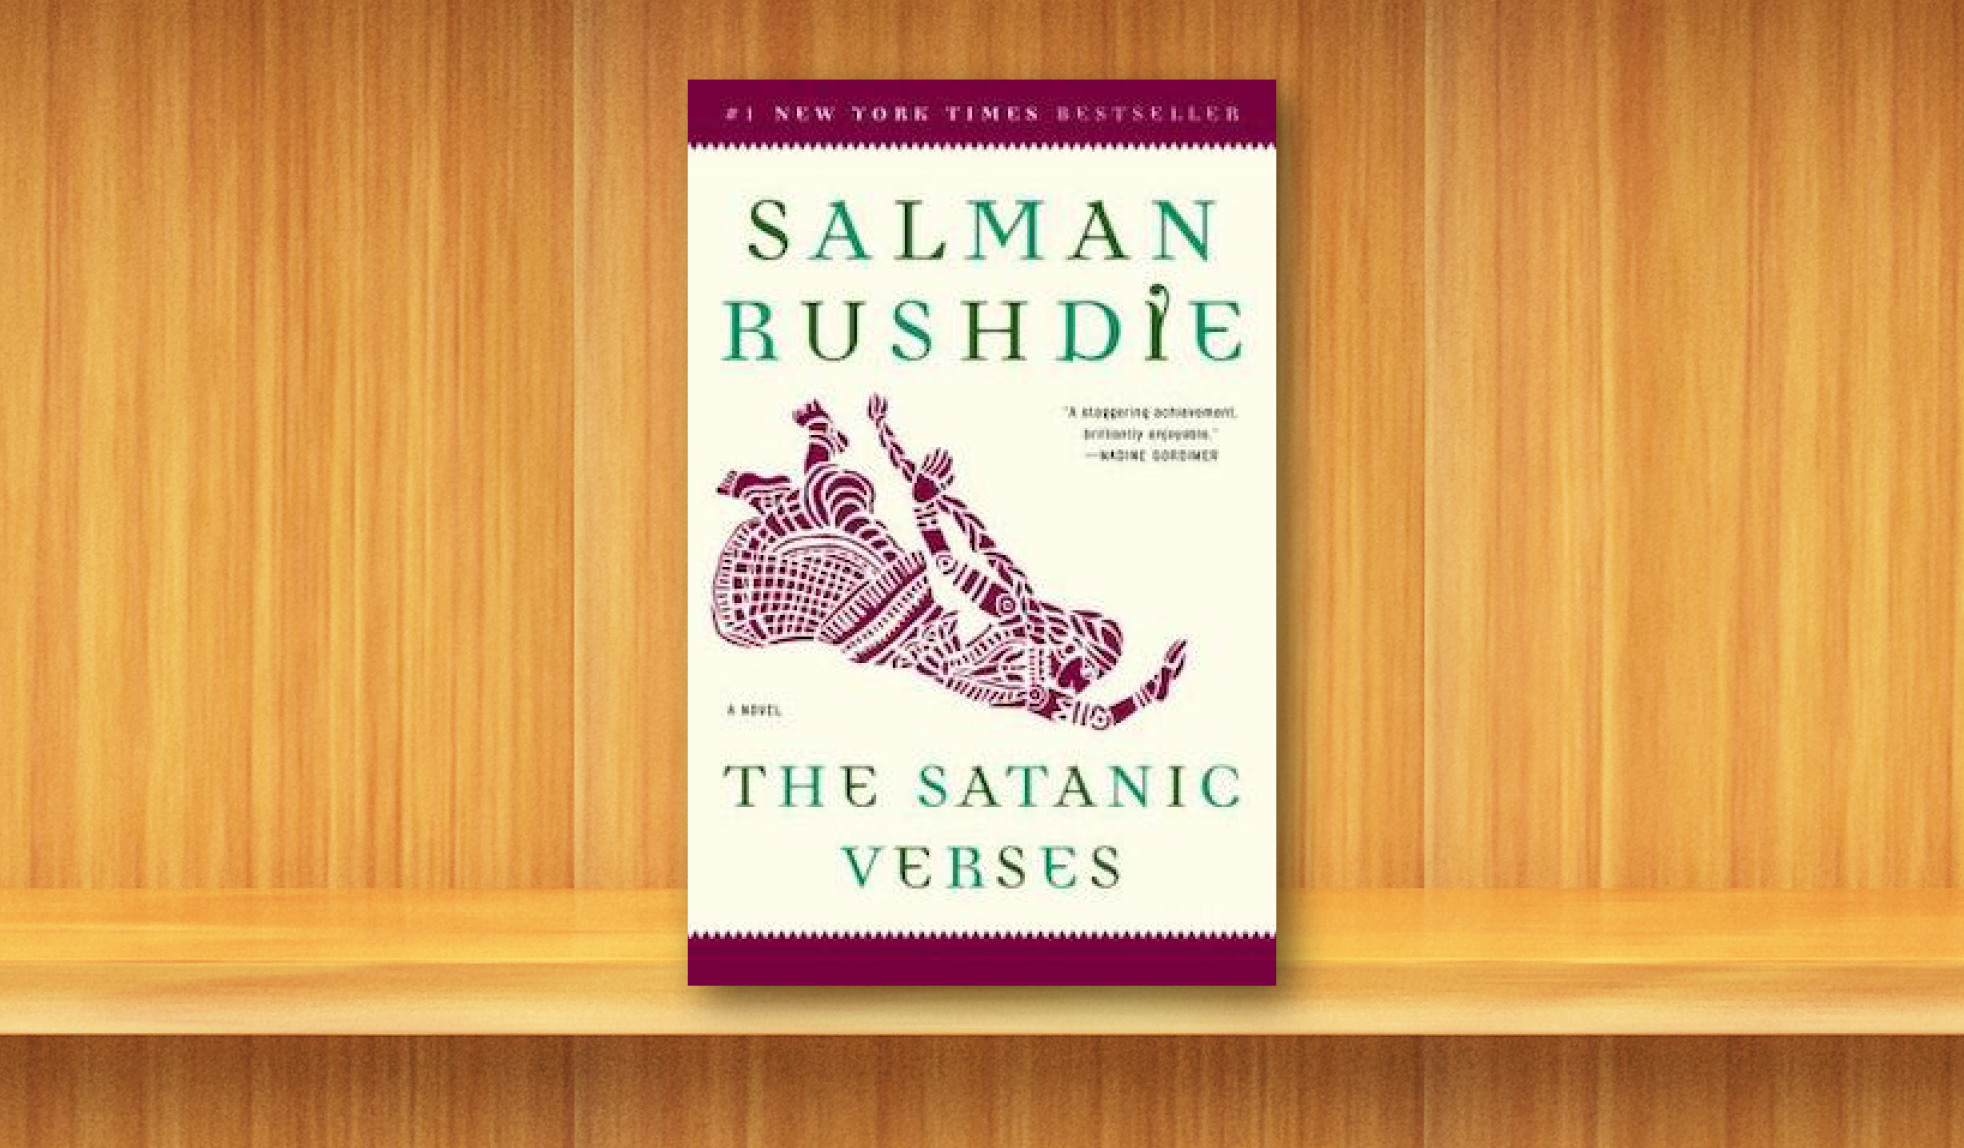 Salman Rushdie's iconic novel is always available in eBook and audiobook formats through Sept. 30.